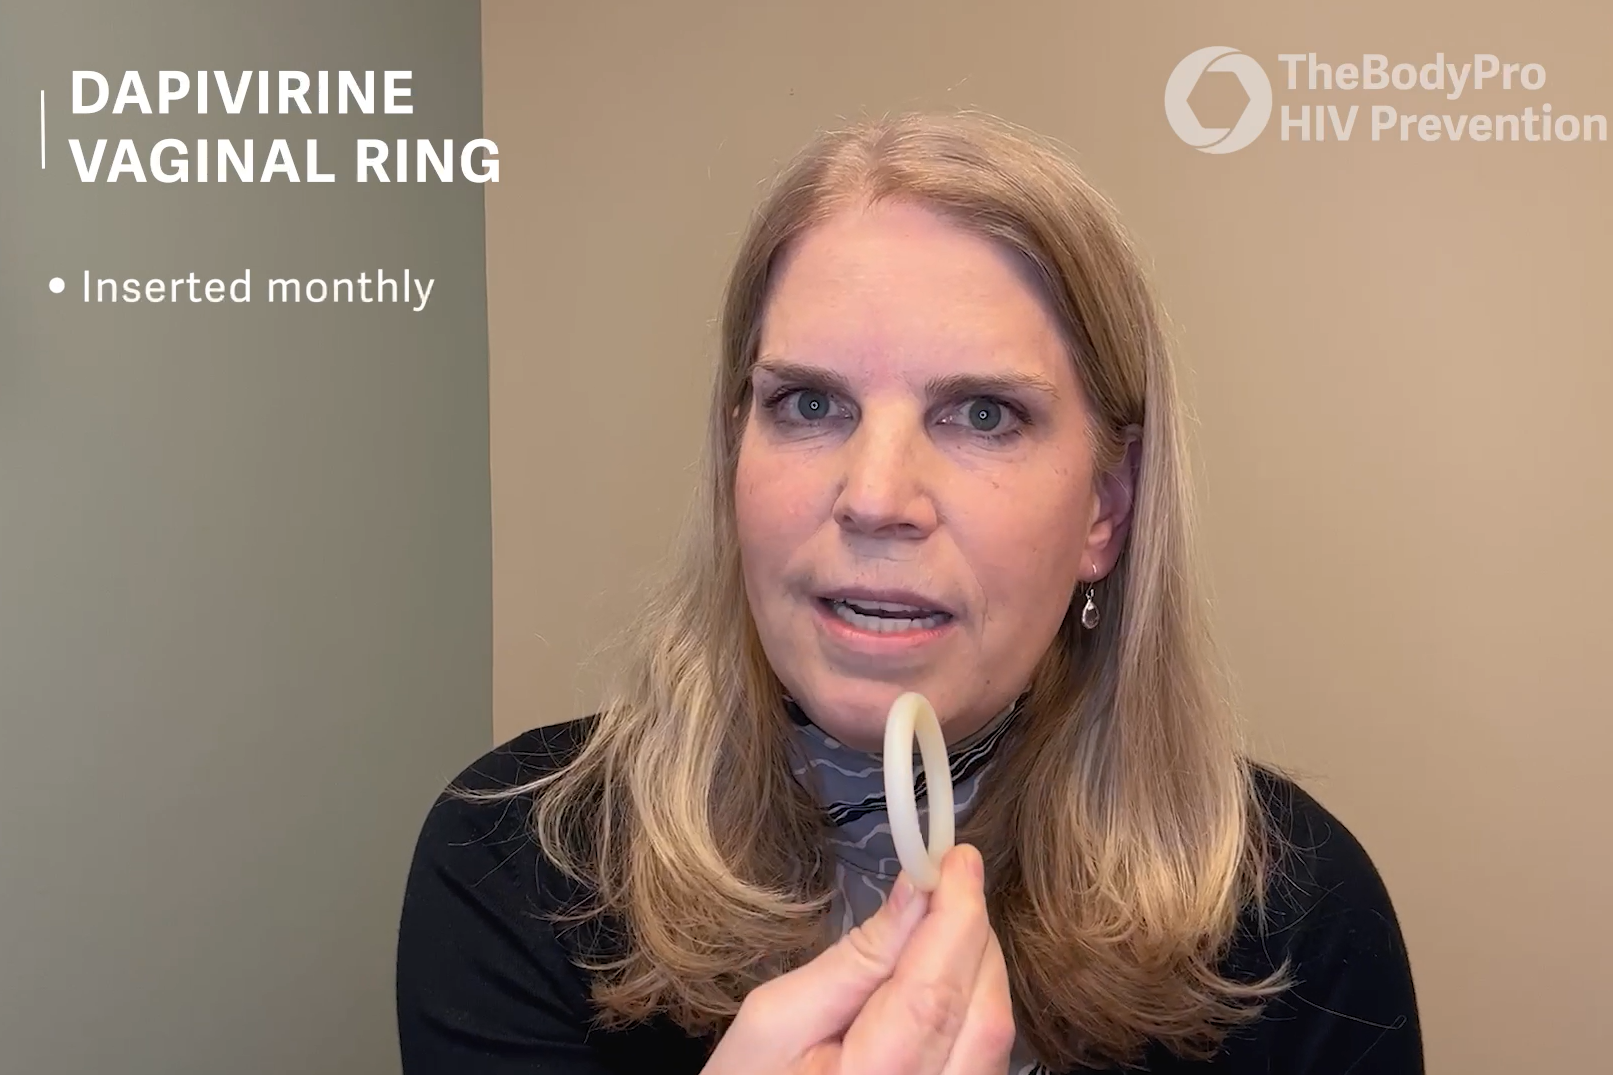 Your Patients Deserve To Choose The Dapivirine Vaginal Ring For Hiv